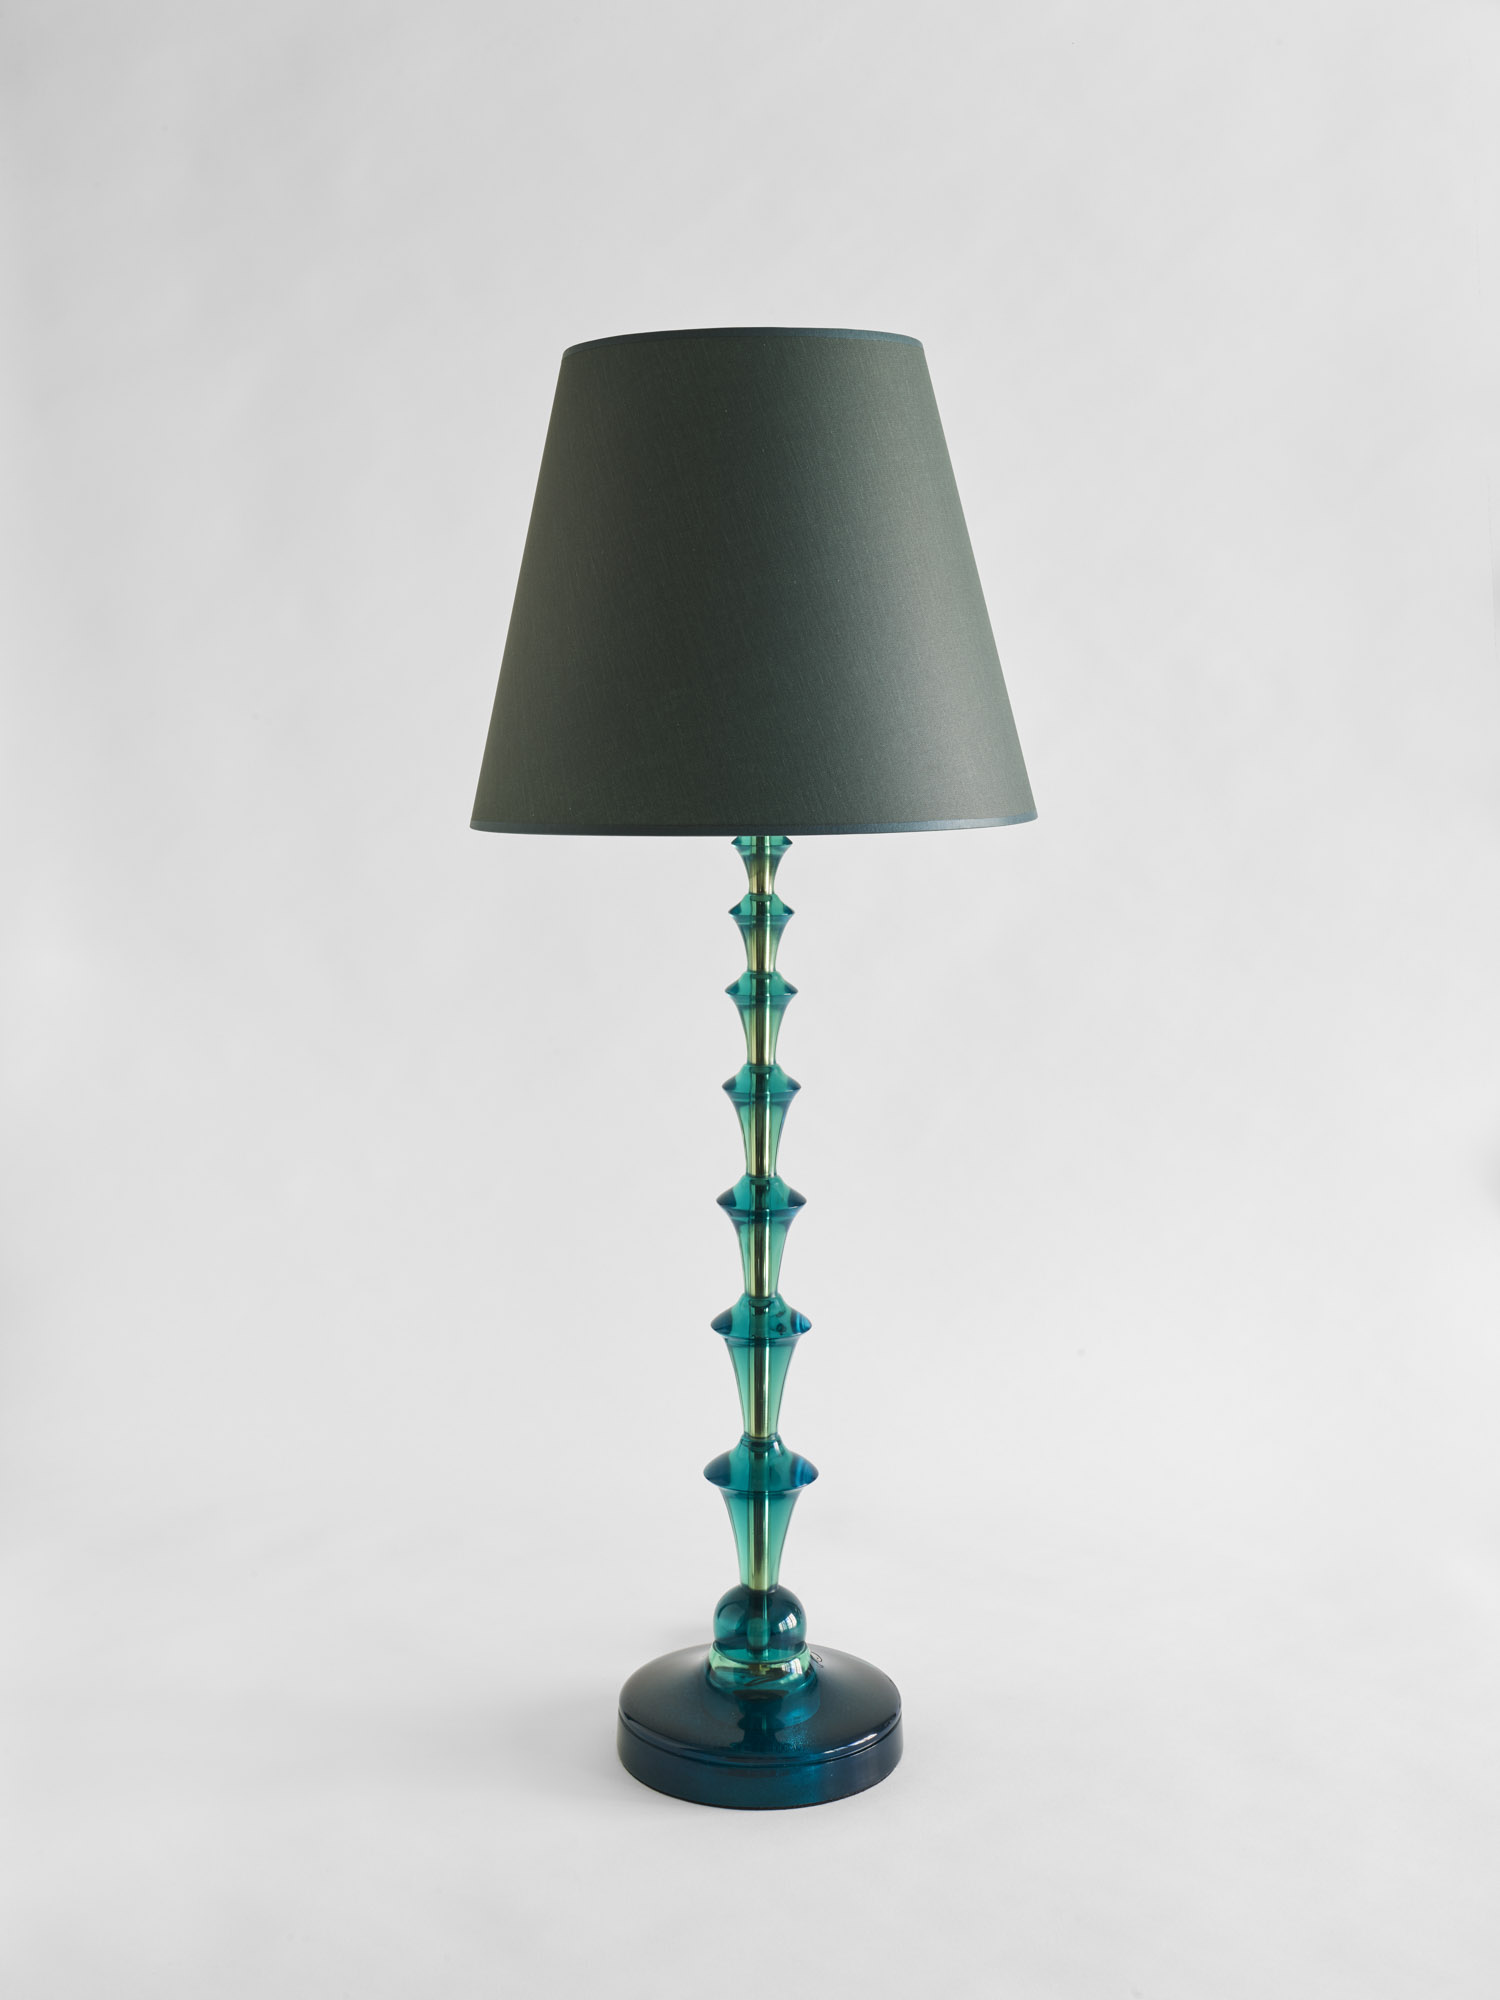 An image from Marianna Kennedy's Beanpole Lamp